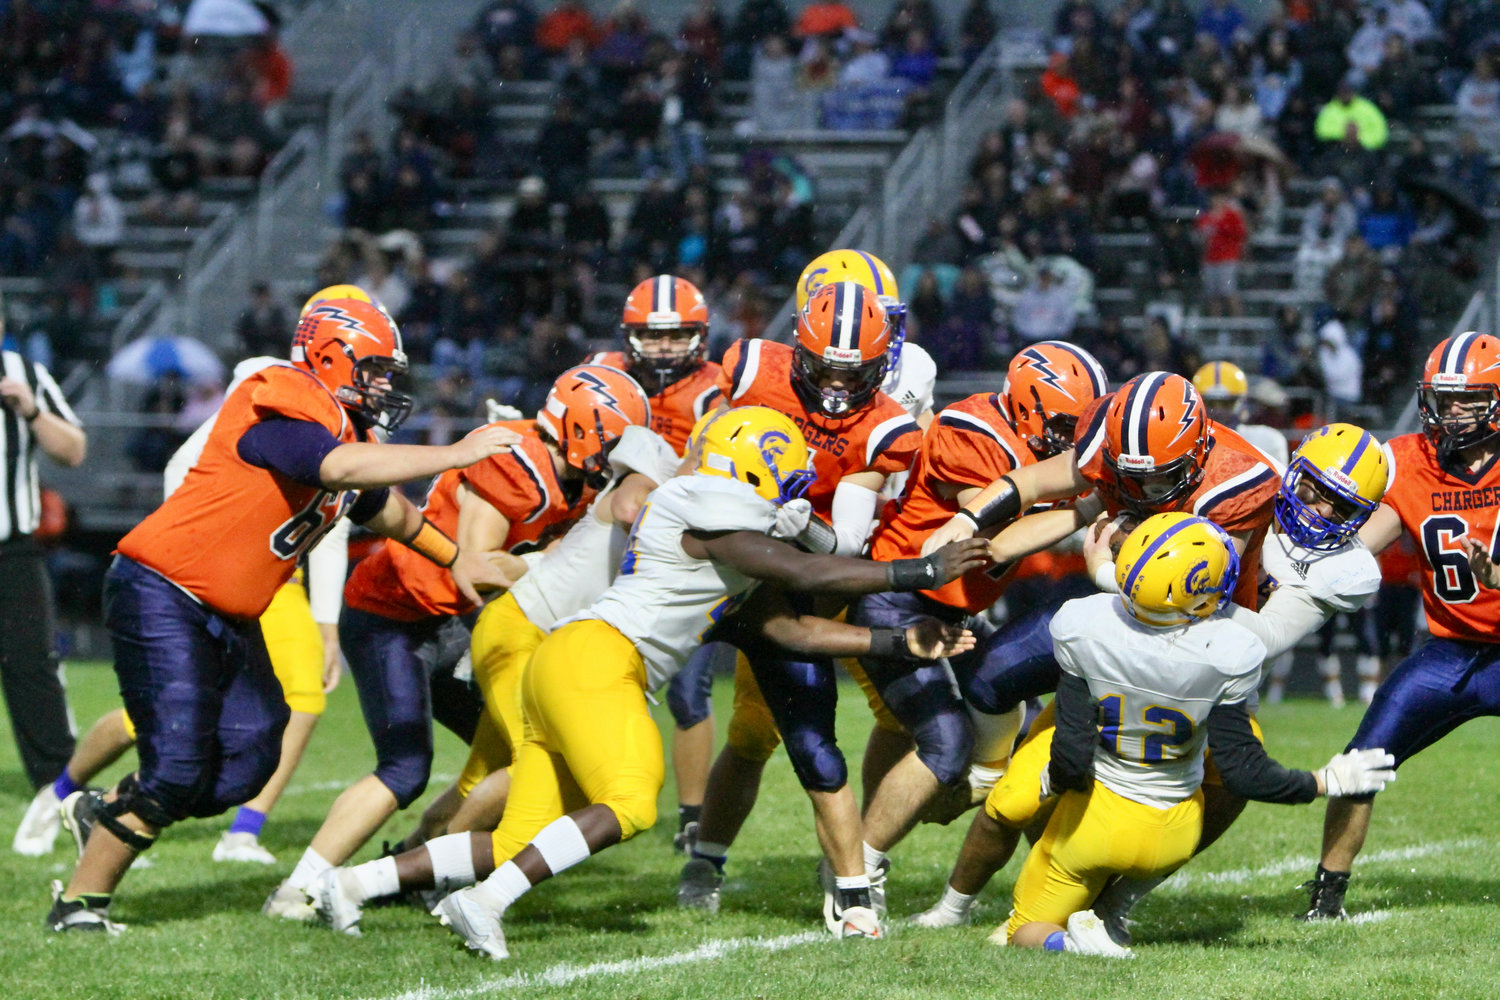 Crawfordsville's defense holds strong on rush by North Montgomery.